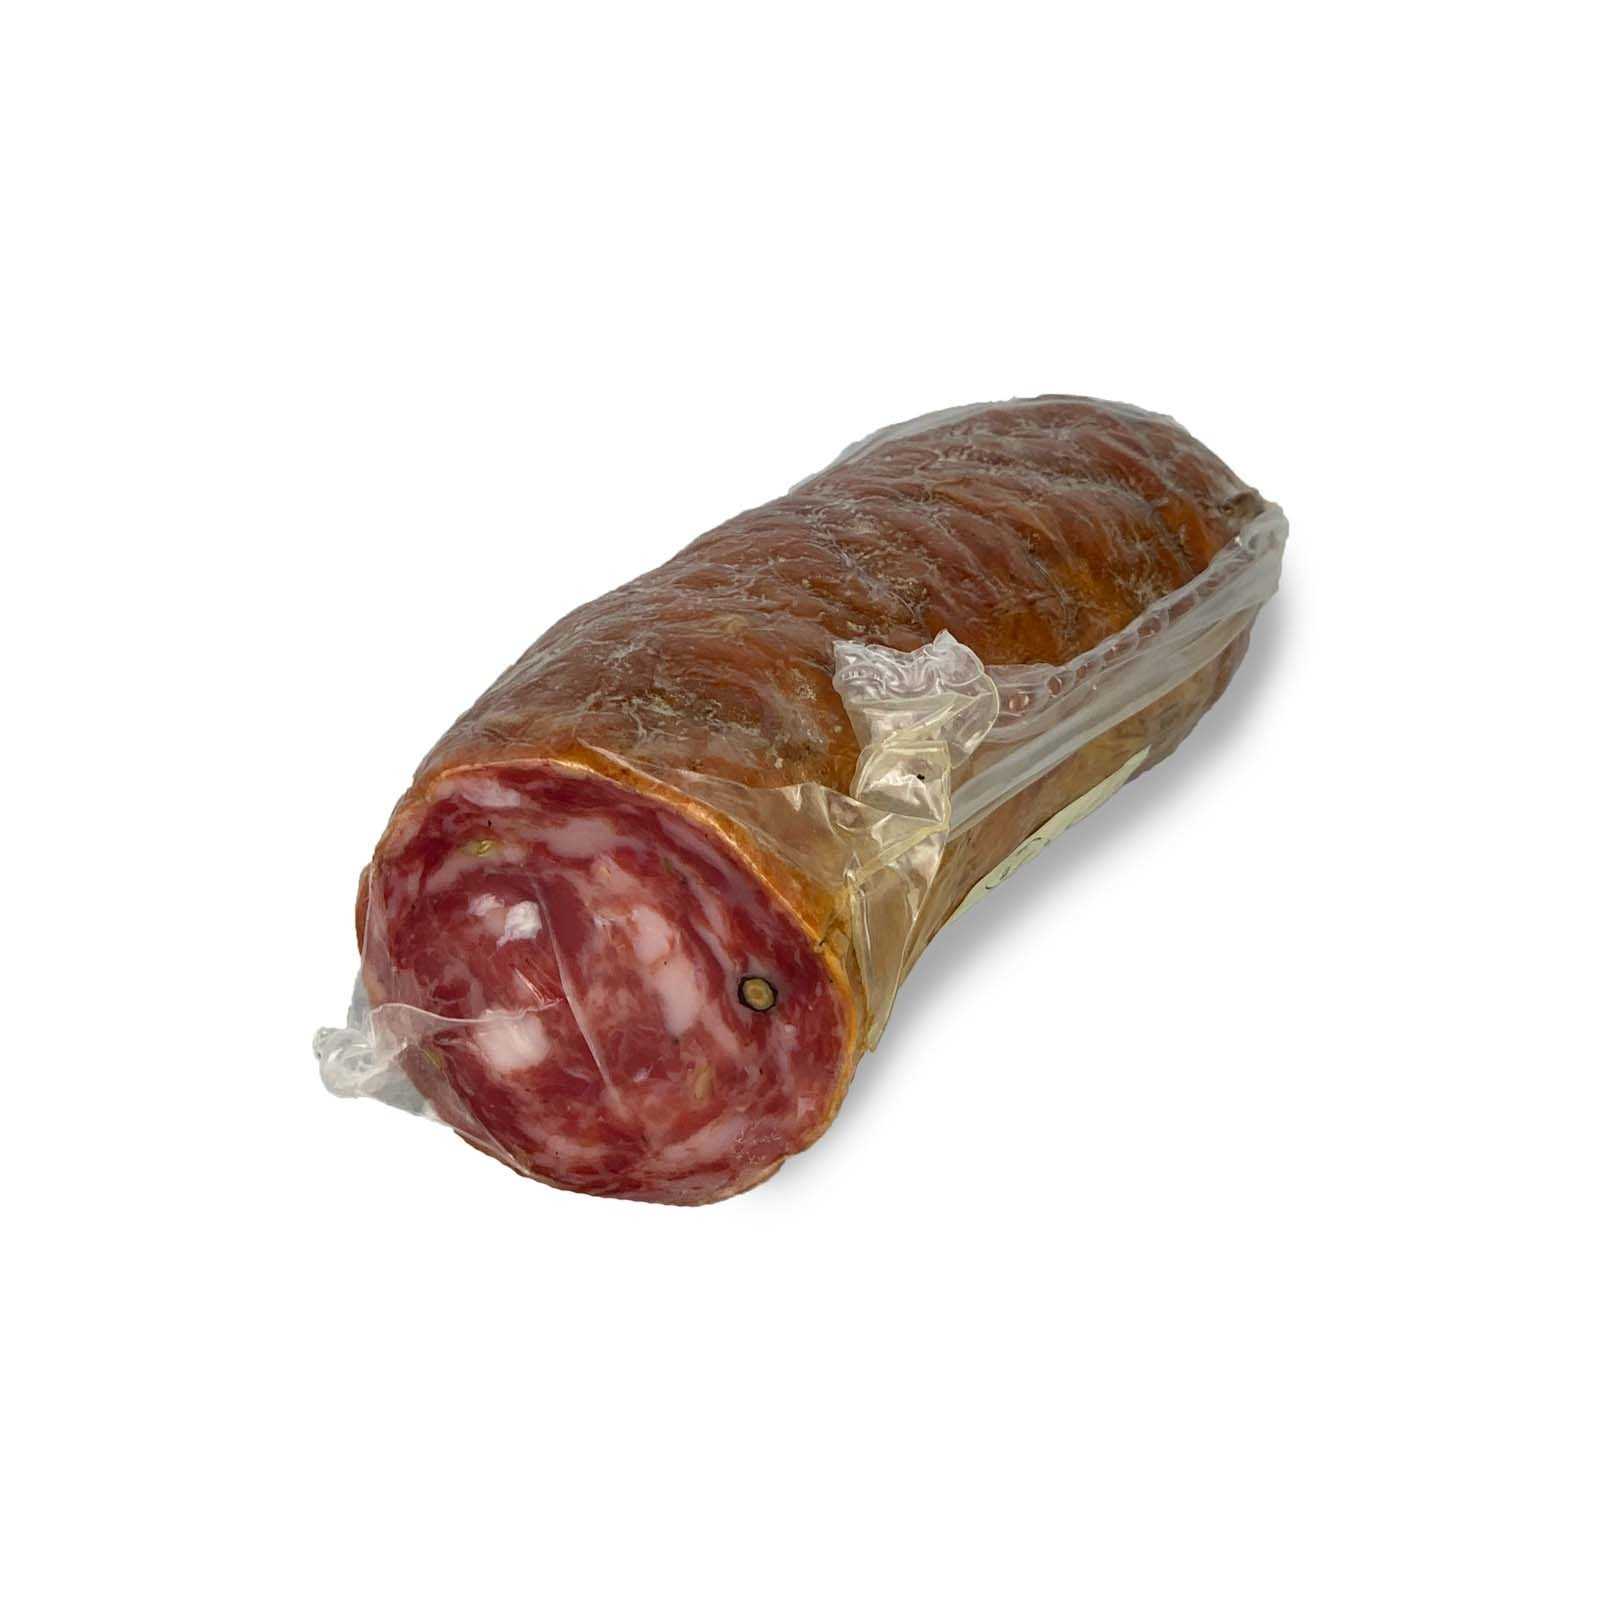 The Sbriciolona is certainly one of the cured meats that characterize the Tuscan territory much more than others and, in particular, the one belonging to the Valdichiana chain can be appreciated for its compact consistency and characteristic flavor, the result of a wise selection and processing of pigs coming exclusively and exclusively from this territory and raised in the wild. Furthermore, drying, stewing and seasoning follow ancient times and methods that give the product its inimitable quality.